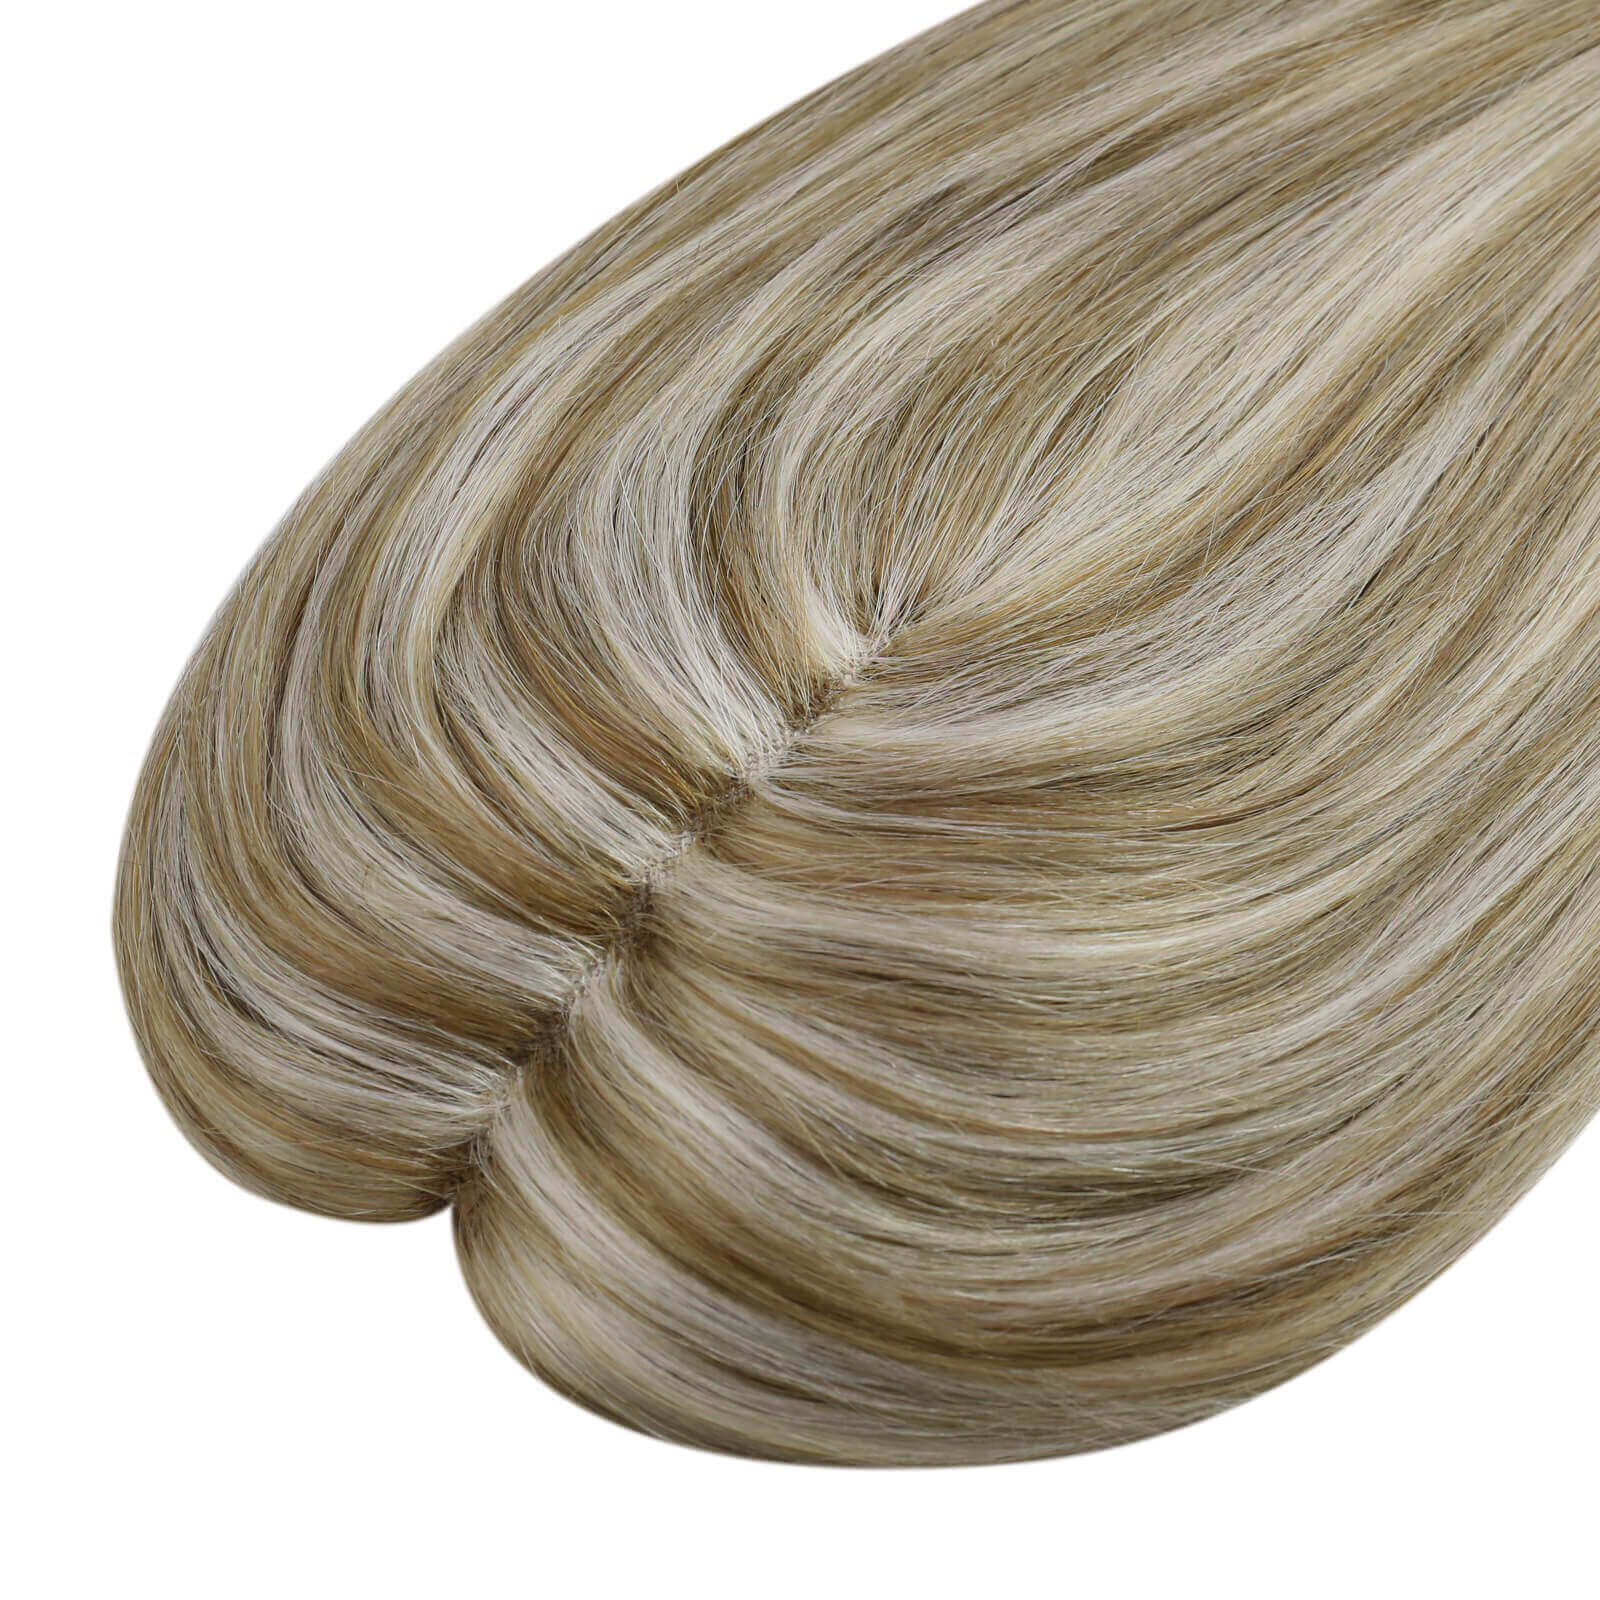 100% human hair topper hand made hairpieces for women